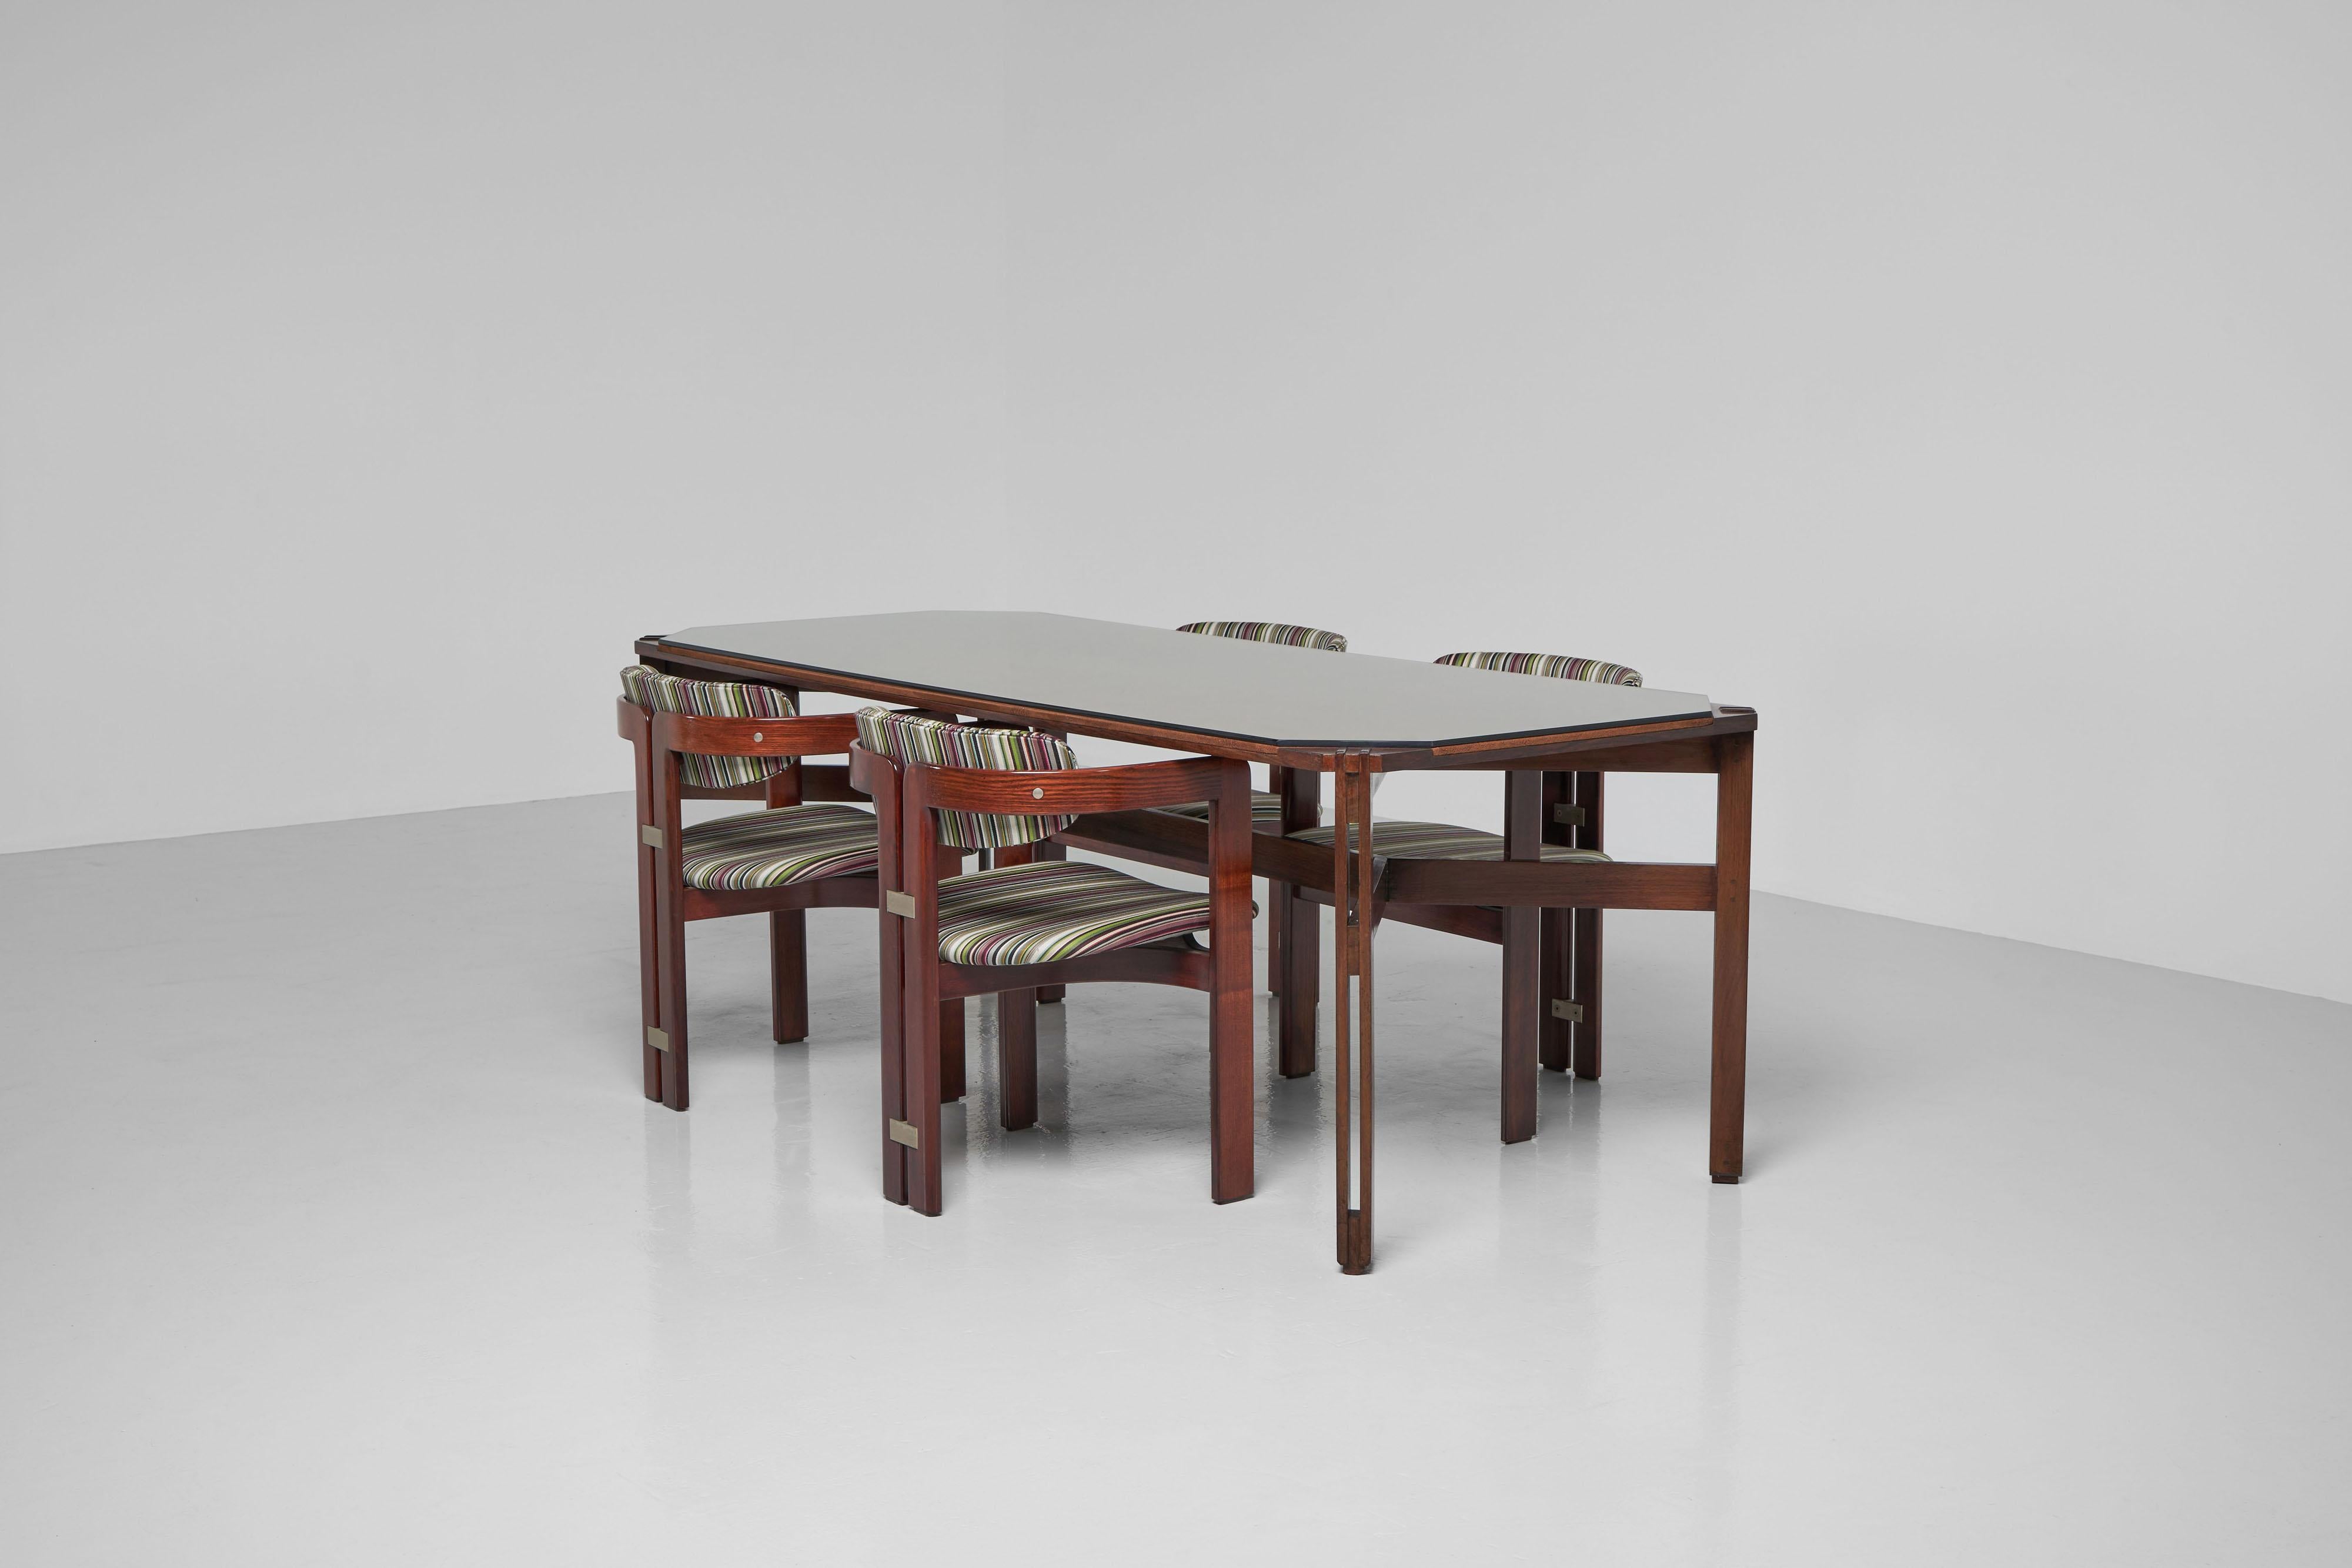 This is for a rare model 574/2 dining table designed by Ico Parisi and manufactured by Figli di Amedeo Cassina, Italy 1959. This rare dining table was part from a series designed by Parisi for Cassina at the end of the 1950s. The production started